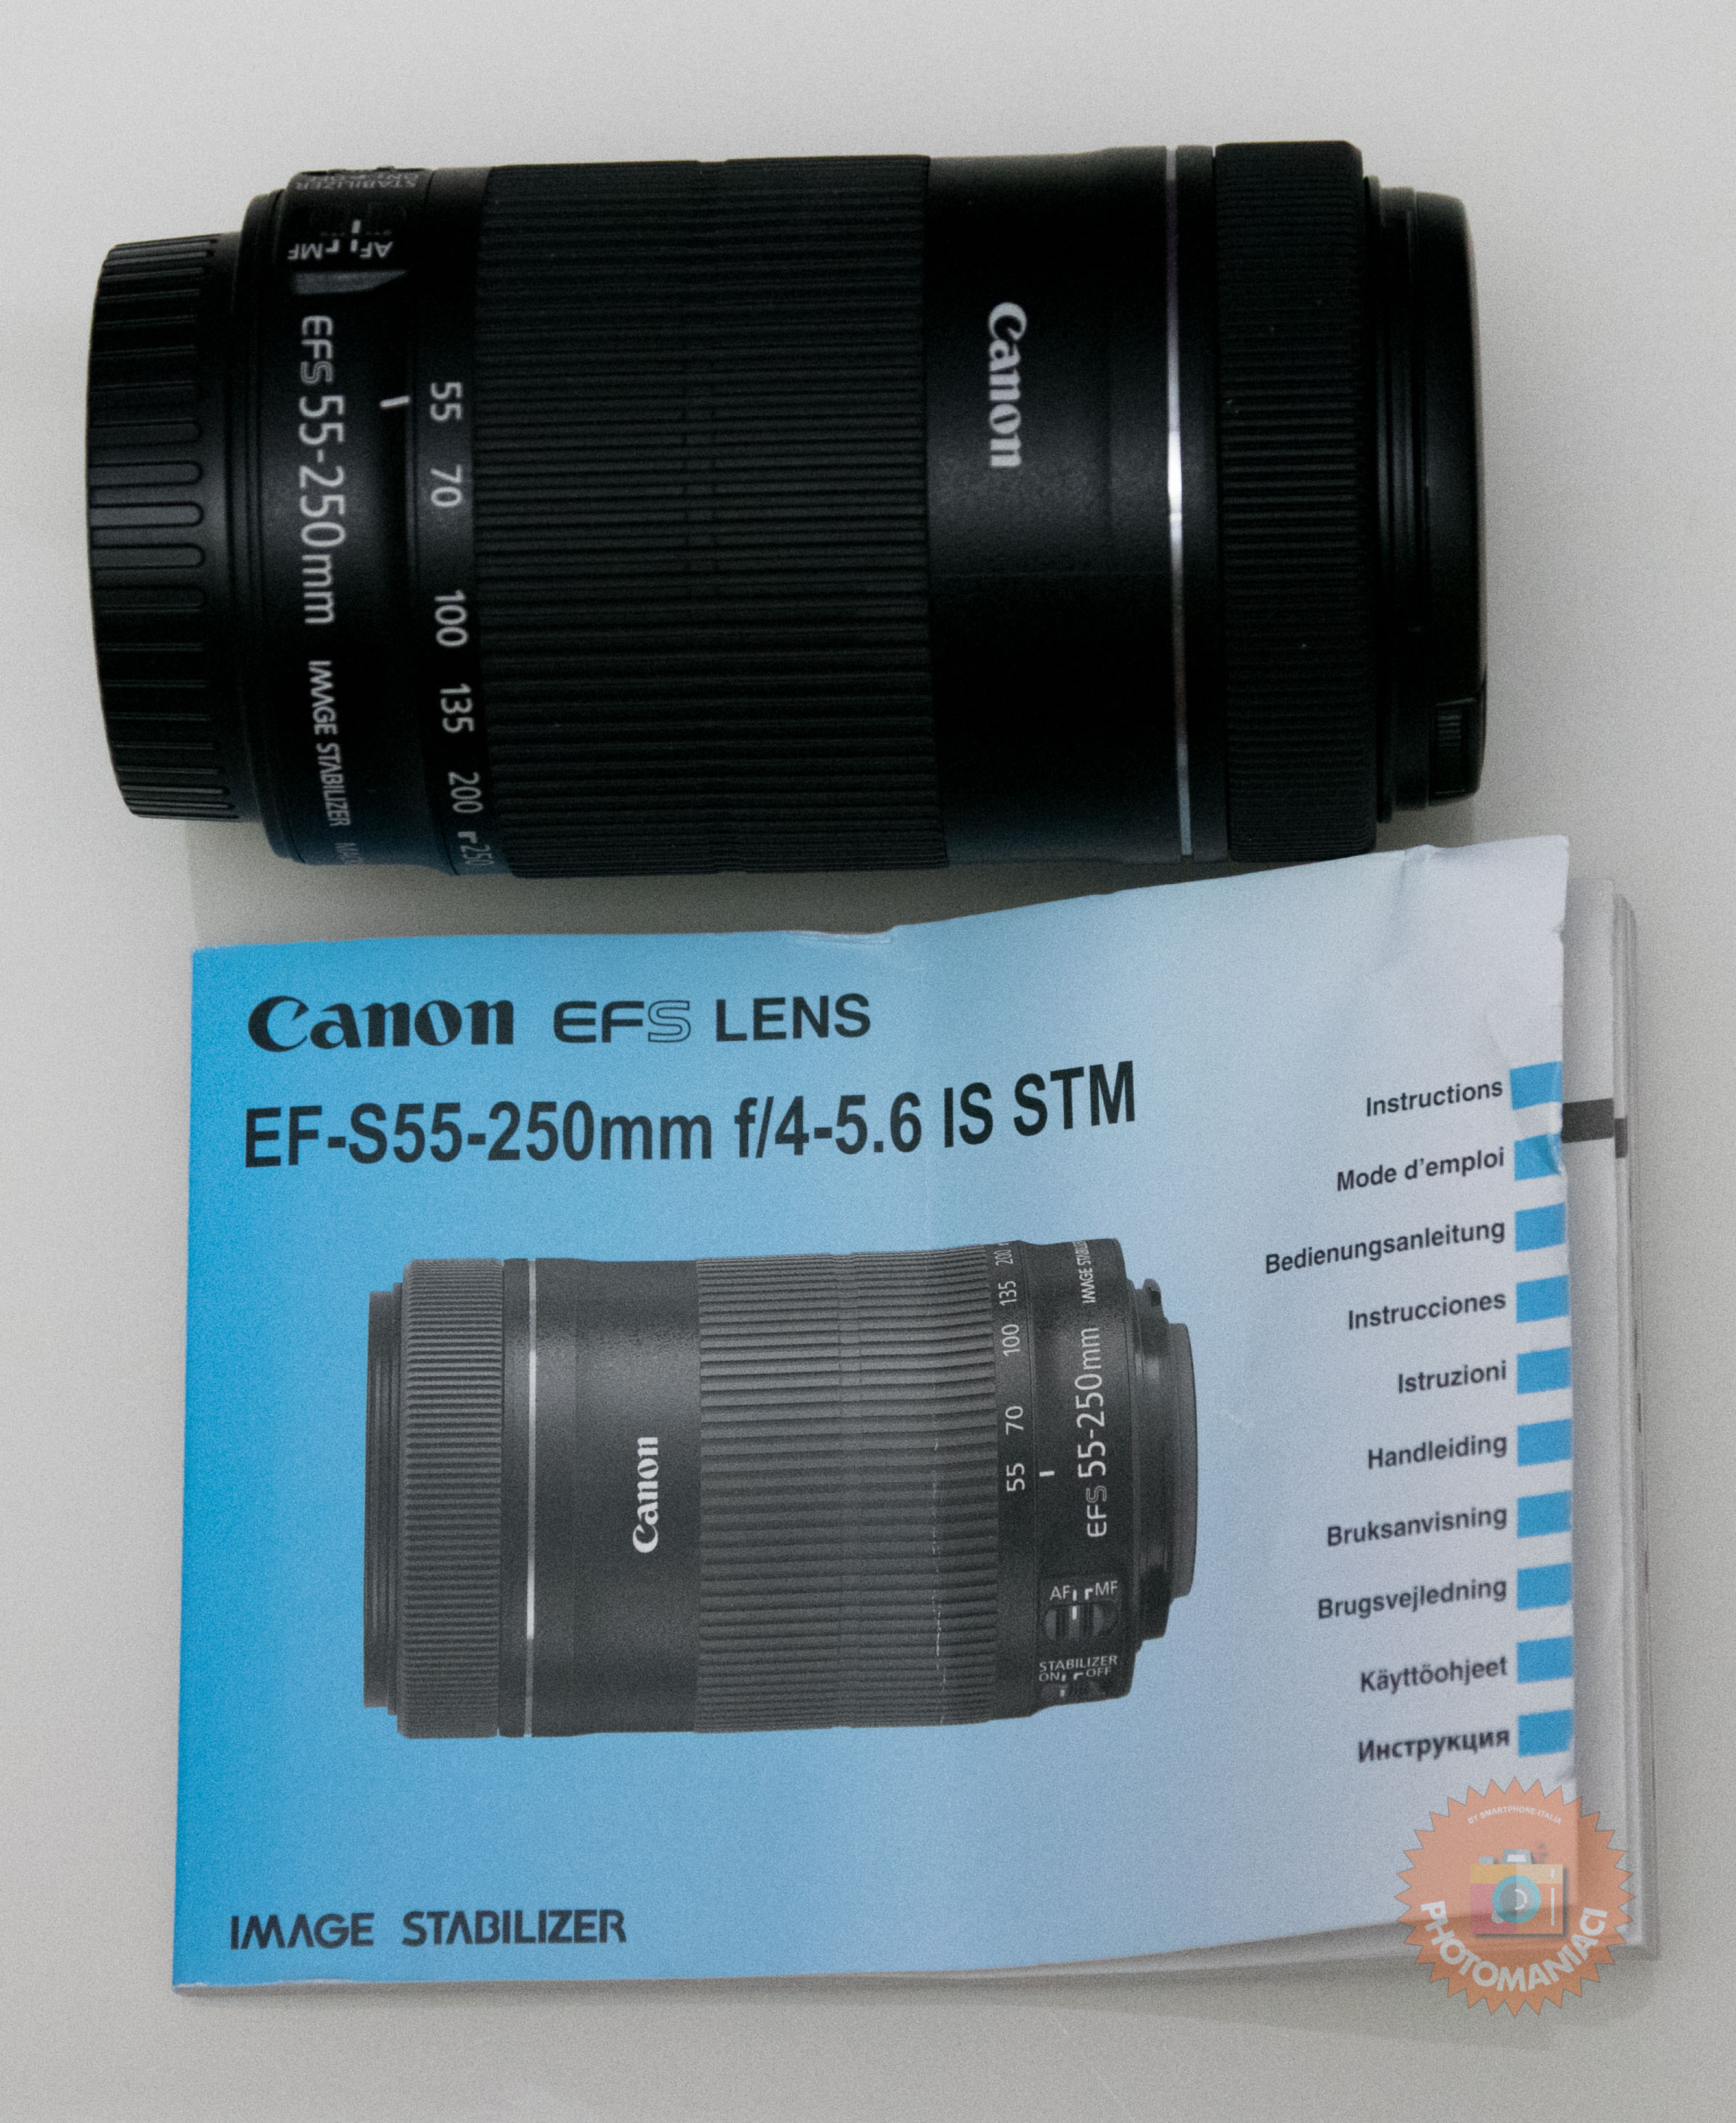 Recensione Canon EF-S 55-250mm f4-5.6 IS STM by PhotoManiaci.com